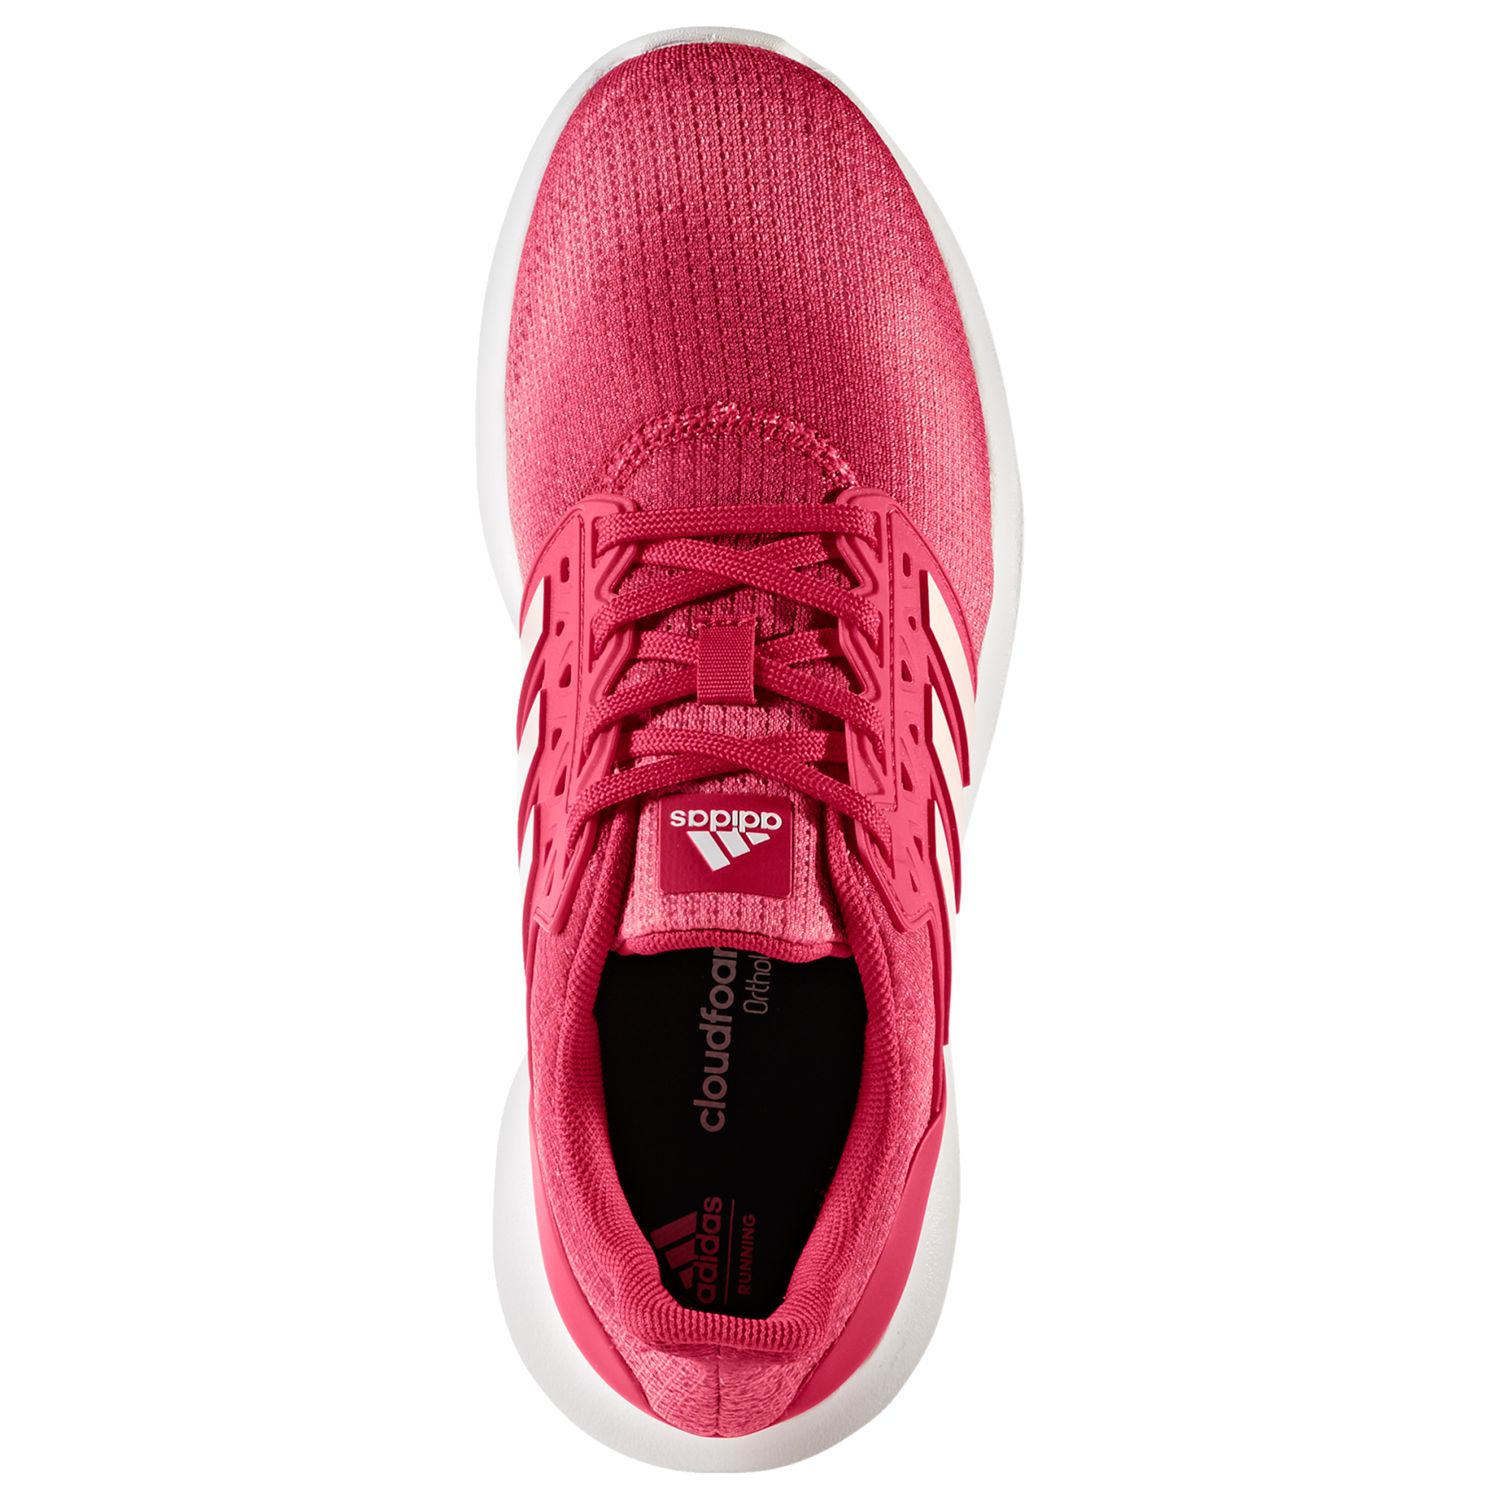 adidas solyx womens running shoes